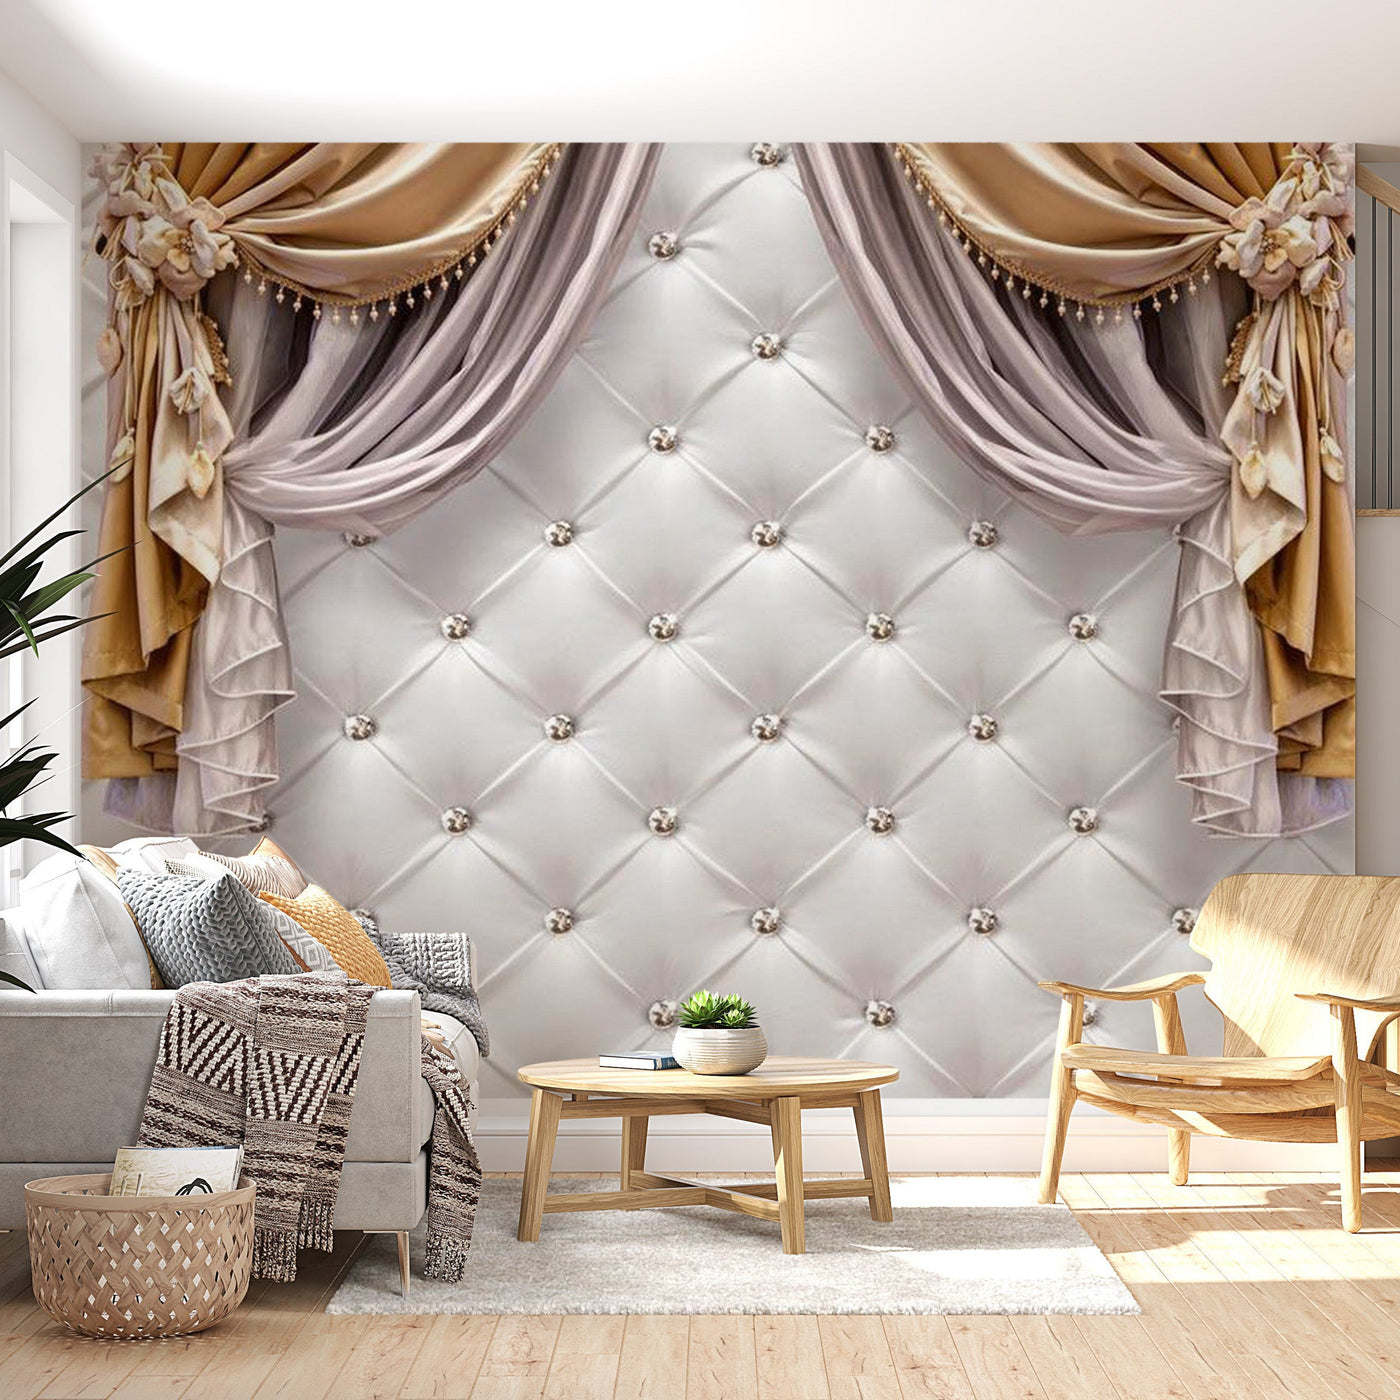 Peel & Stick Wall Mural - Glamour Chesterfield Pattern - Removable Wall Decals